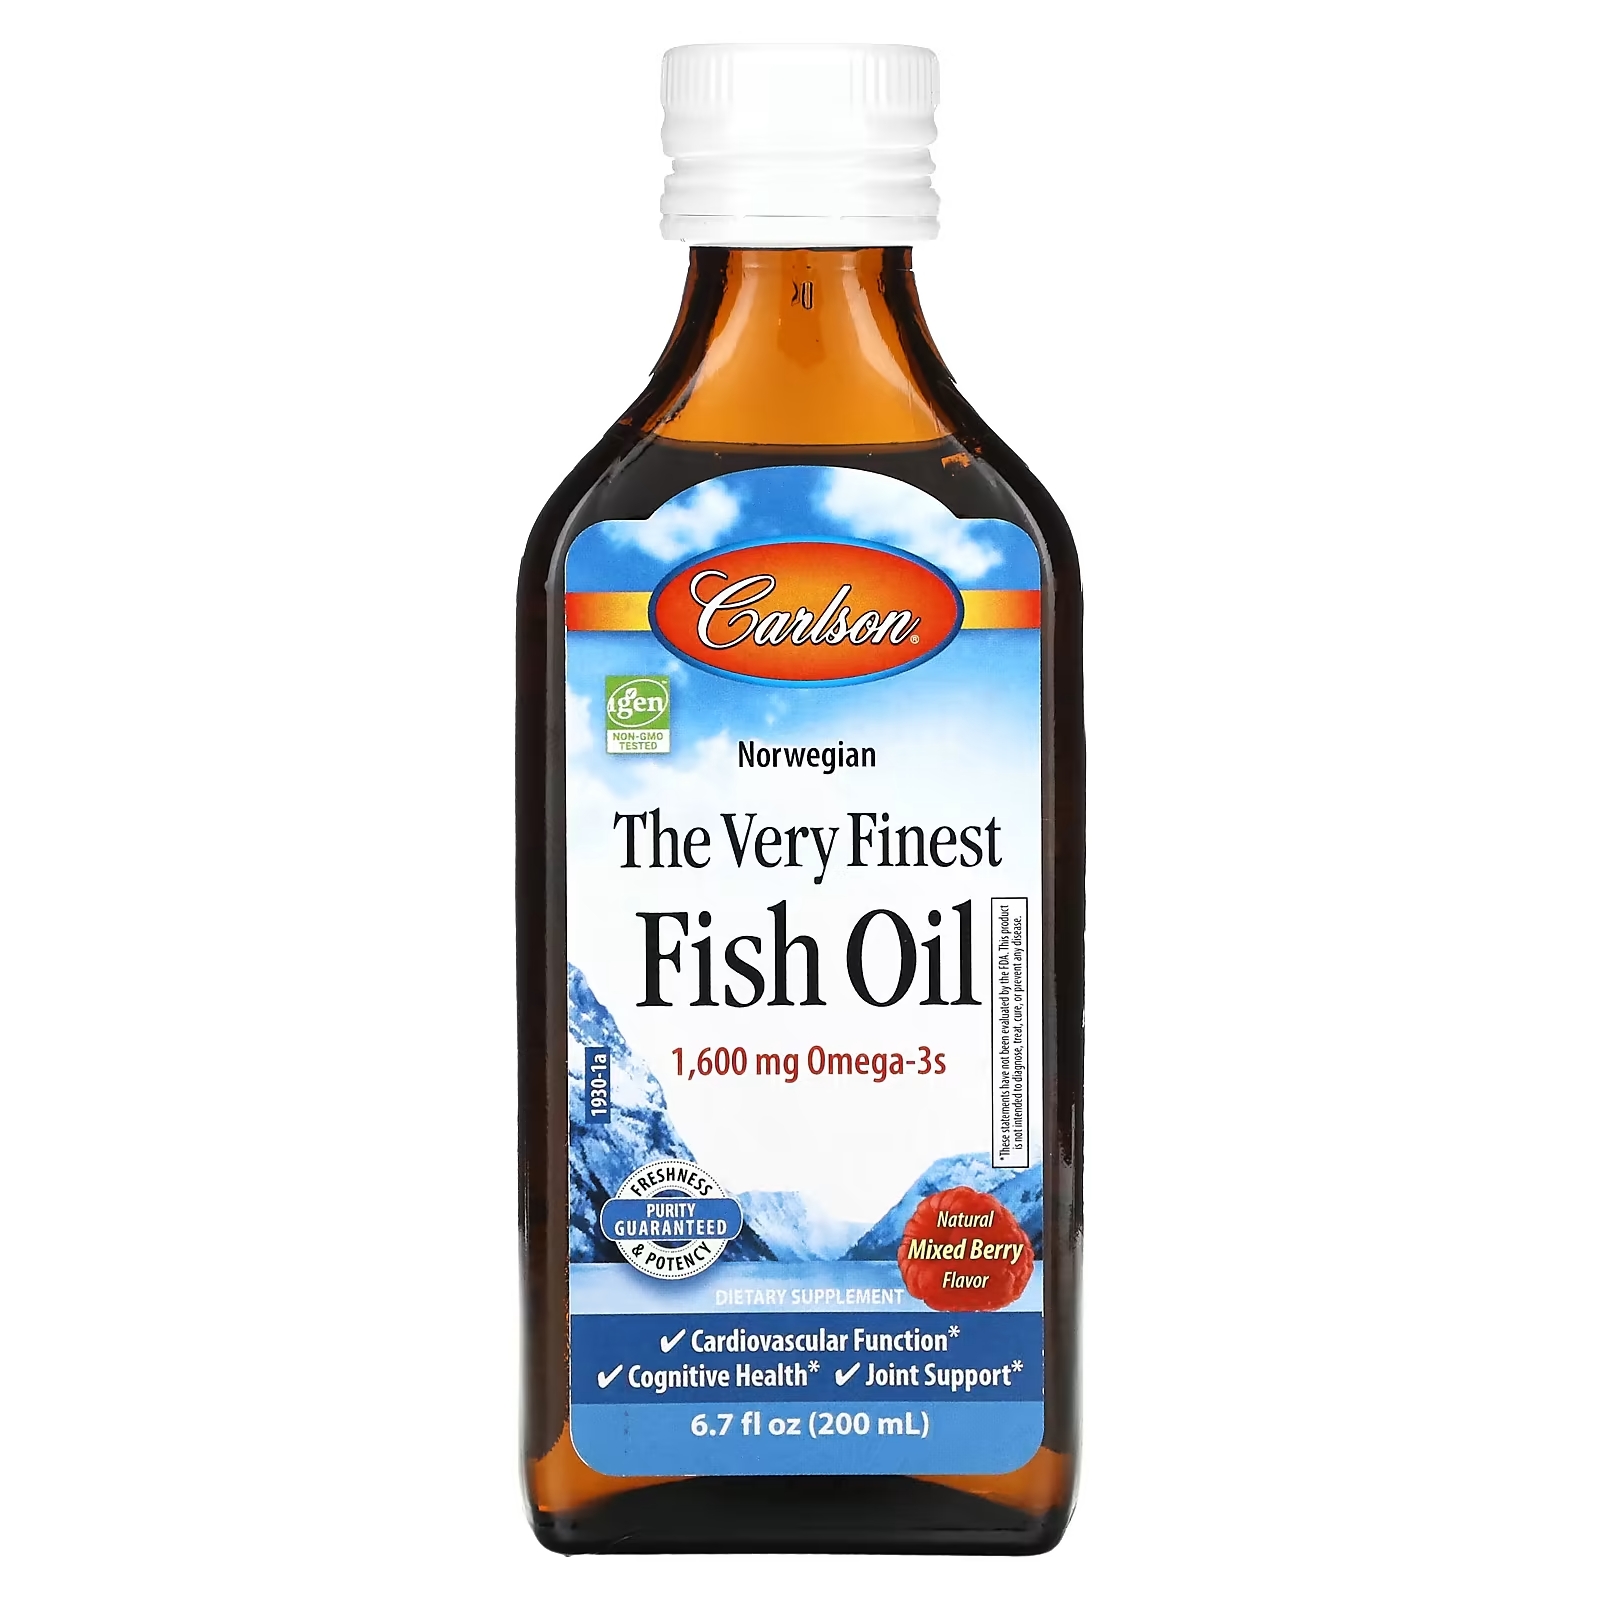 Carlson Norwegian The Very Finest Fish Oil Natural Mixed Berry 1,600 mg, 200 мл carlson kids the very finest fish oil natural mixed berry 800 mg 6 7 fl oz 200 ml